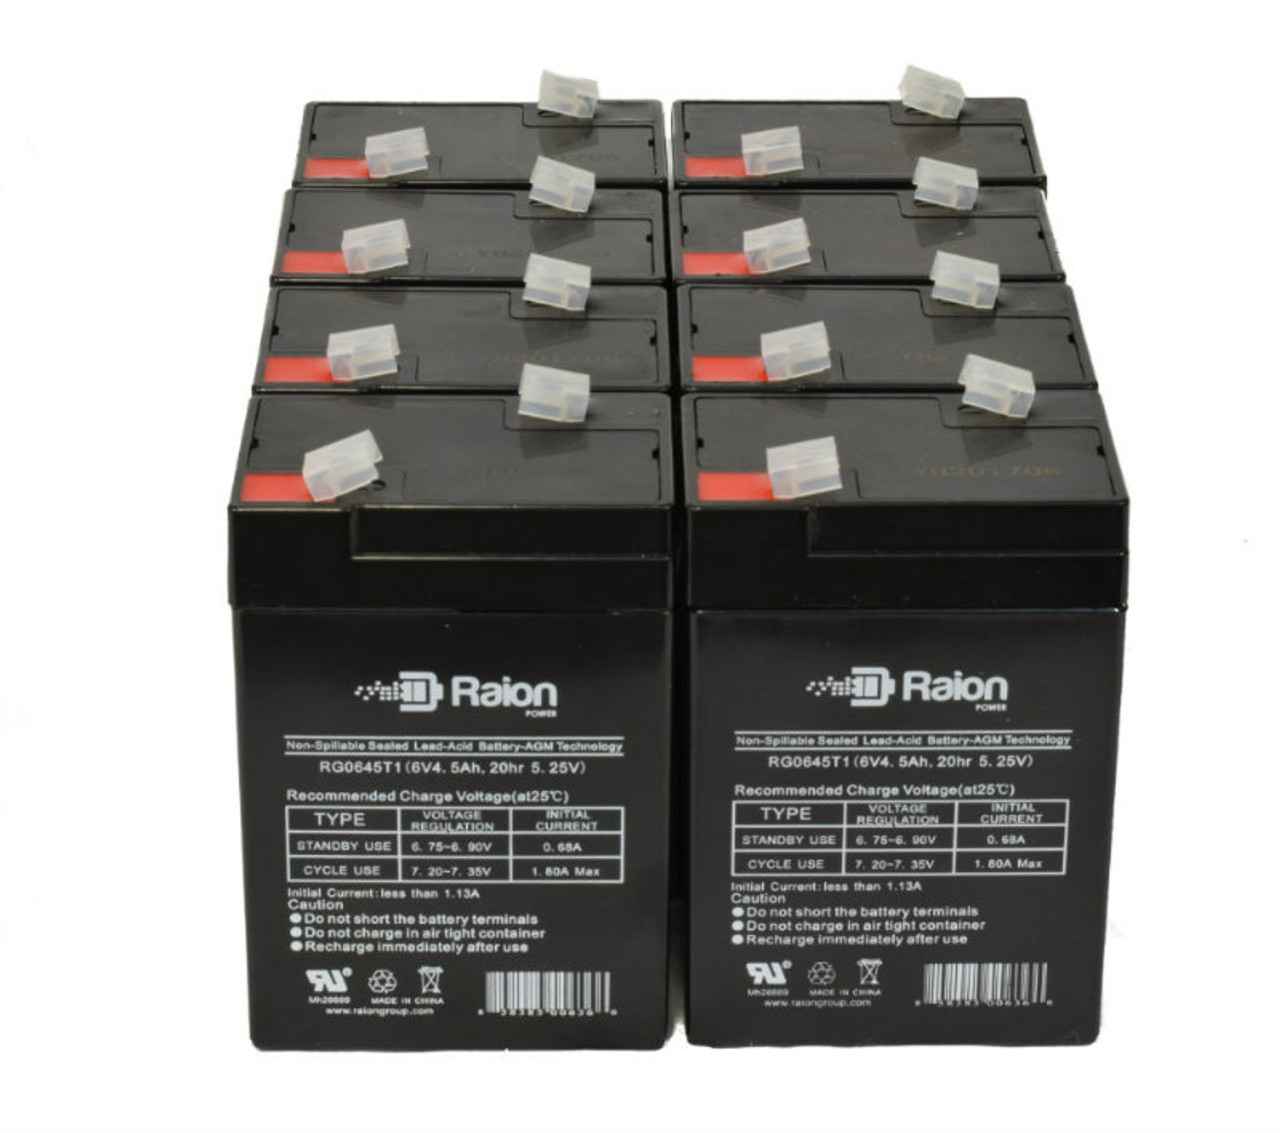 Raion Power 6 Volt 4.5Ah RG0645T1 Replacement Battery for Power Sonic PS-640 - 8 Pack